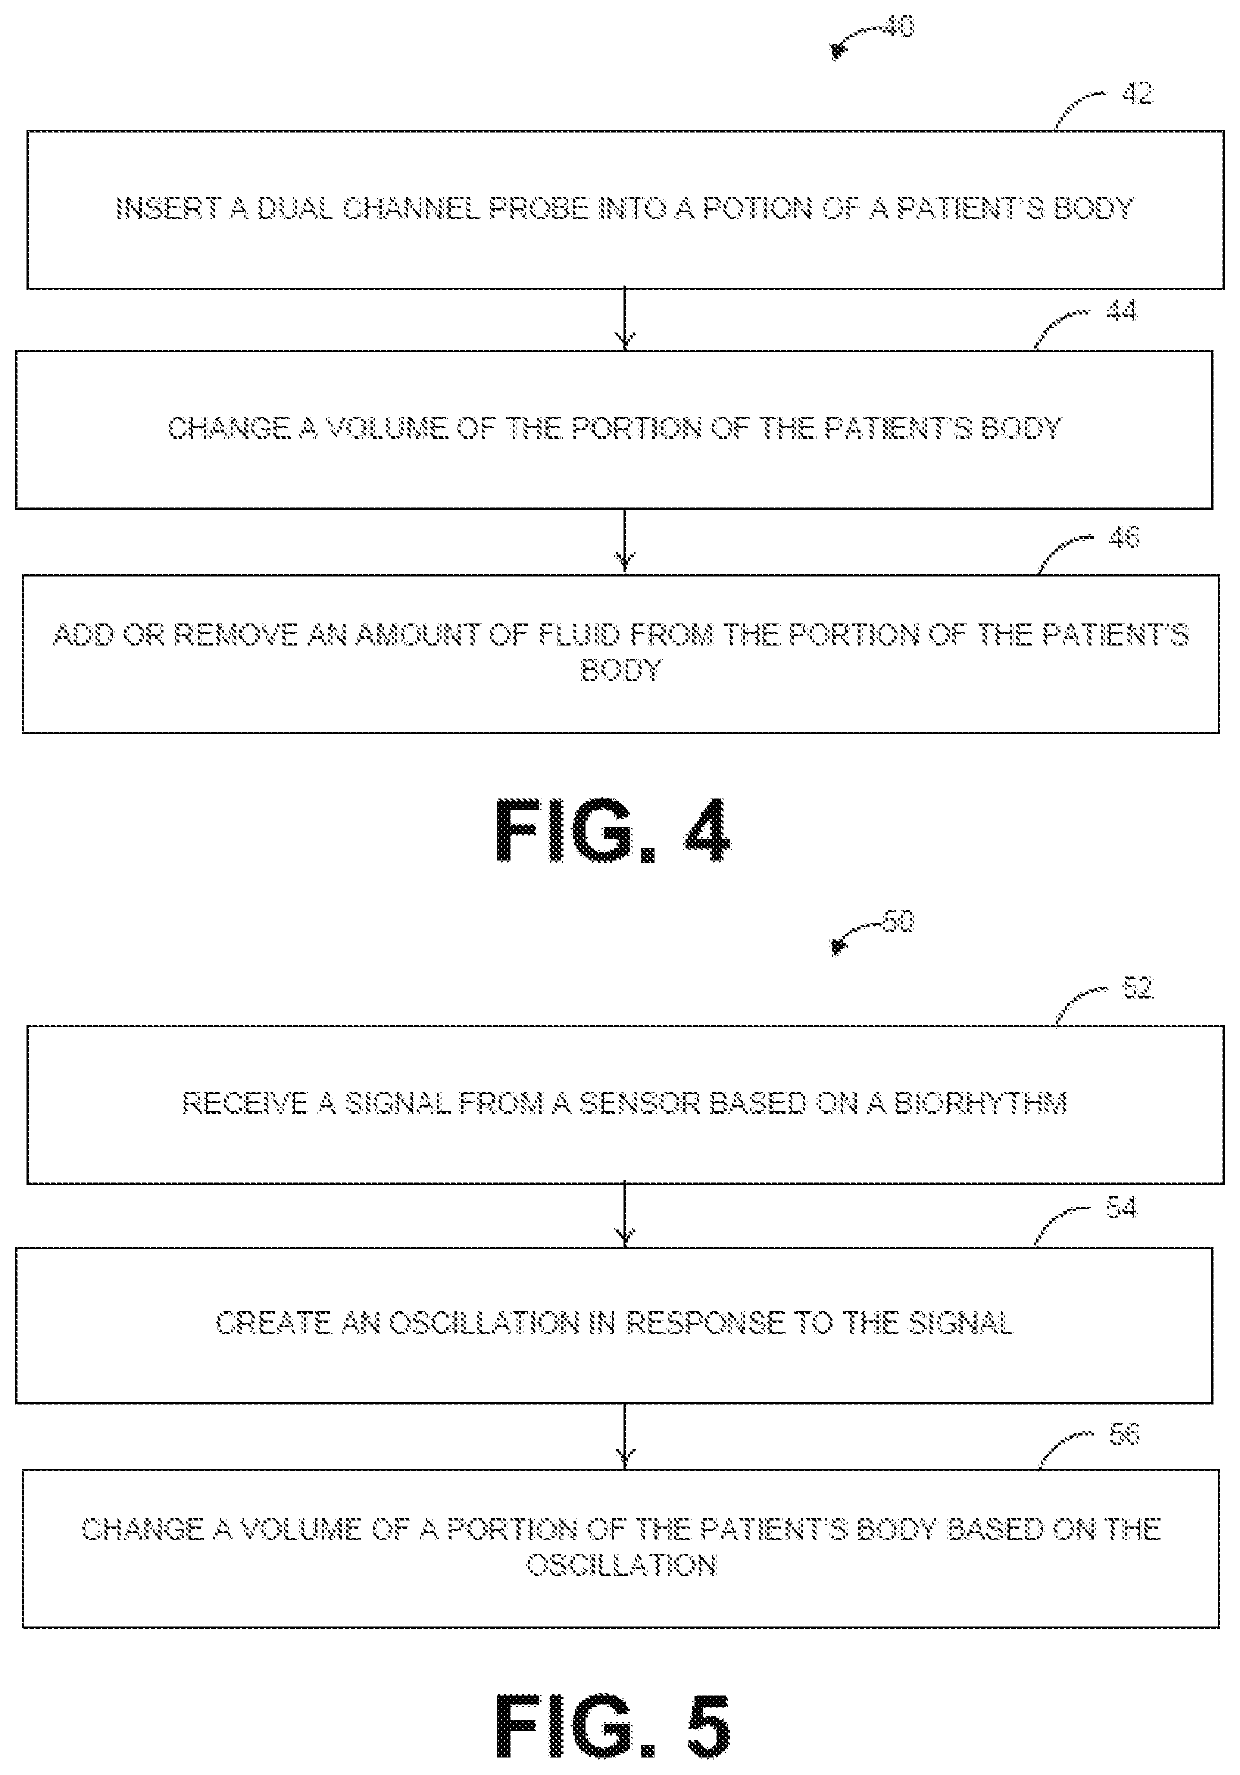 Systems and methods for controlling a volume of fluid within a portion of a patient's body